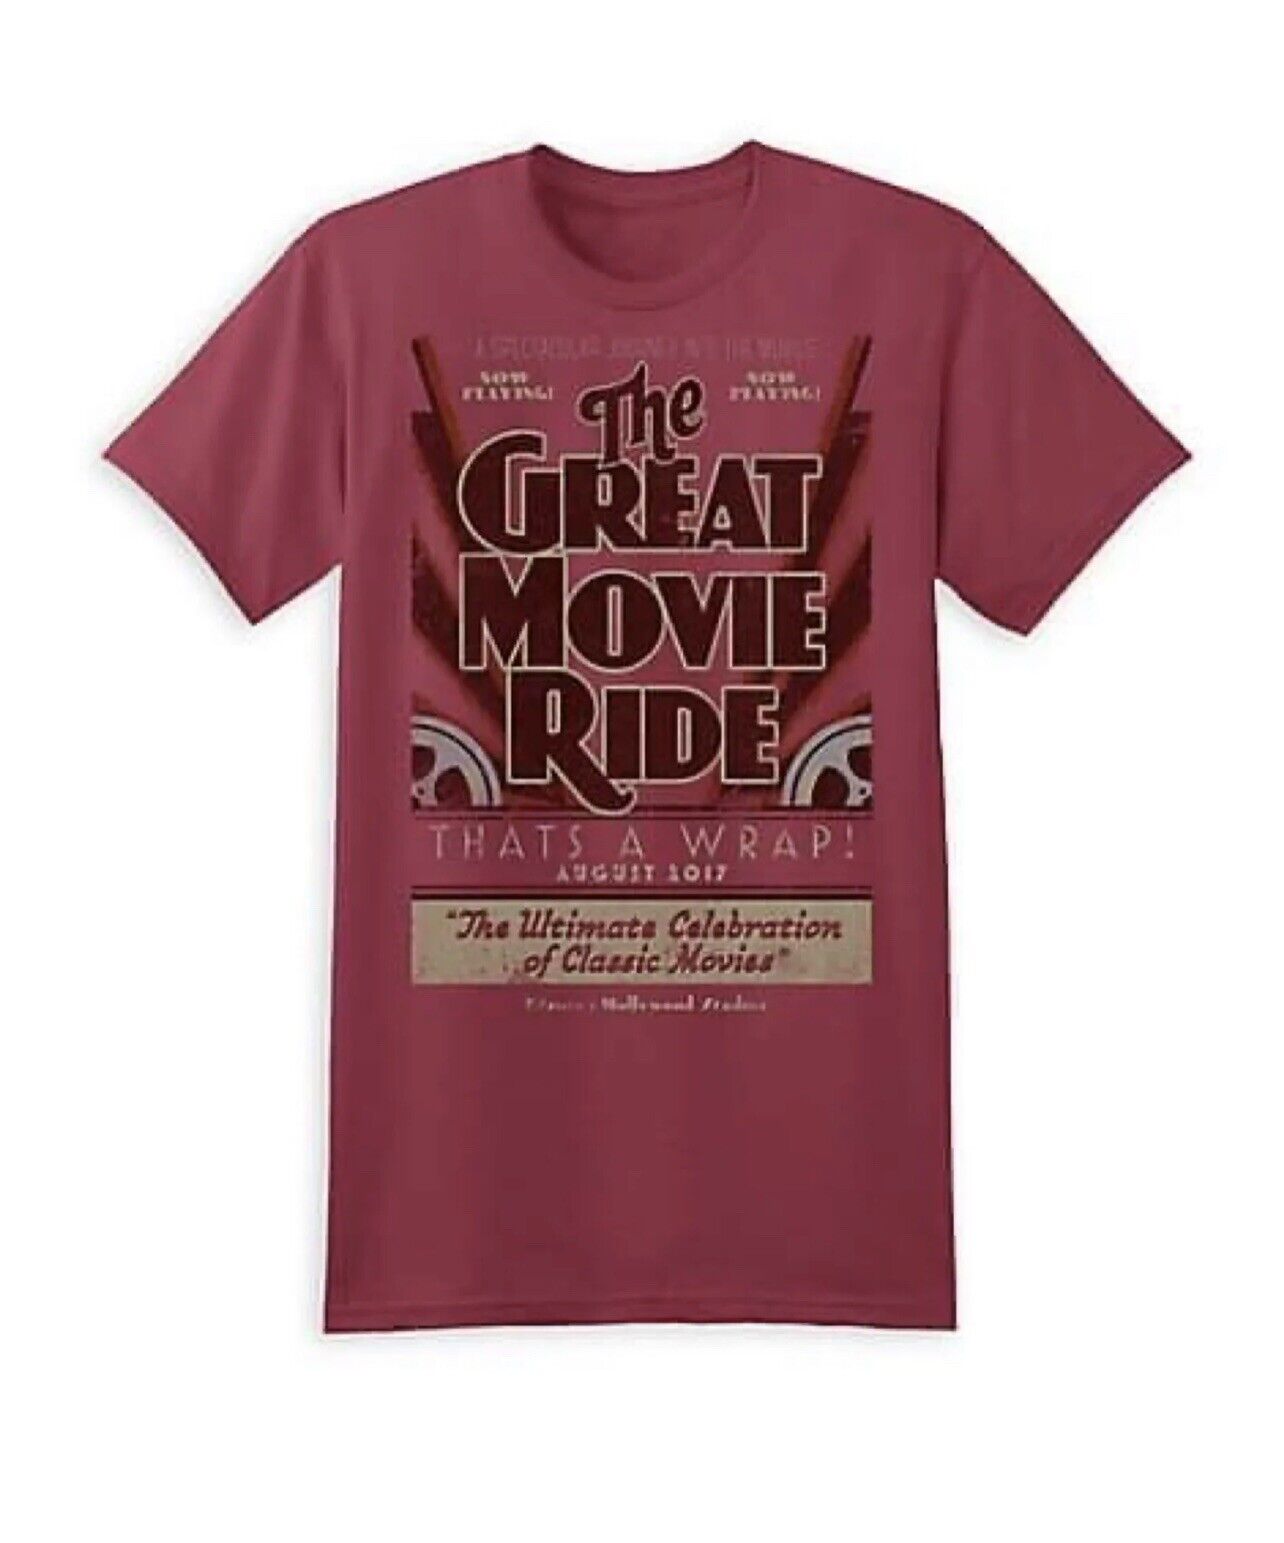 Disney Hollywood Studios The Great Movie Ride Thats A Wrap Tee Shirt Large RED